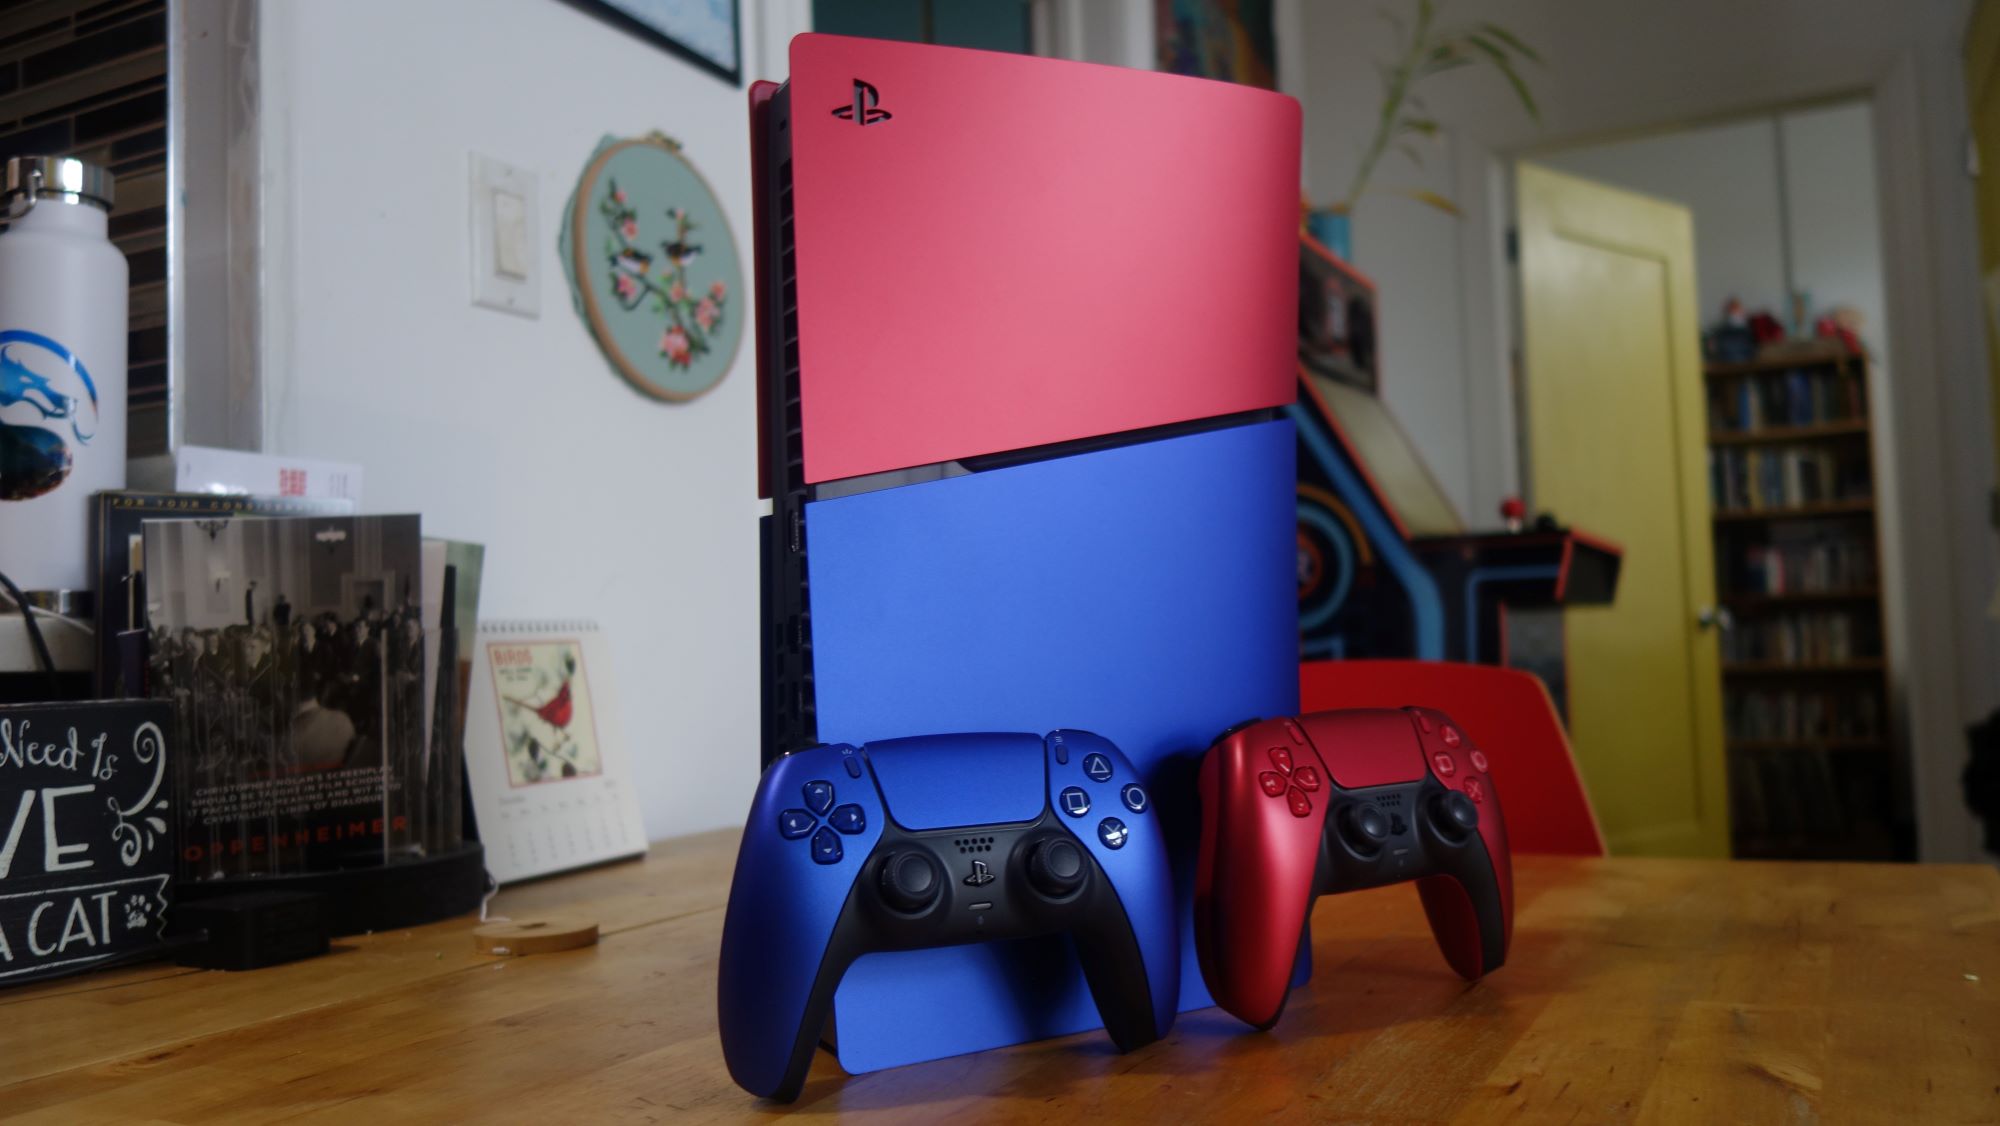 New PS5 Slim pictures show just how small the updated console is